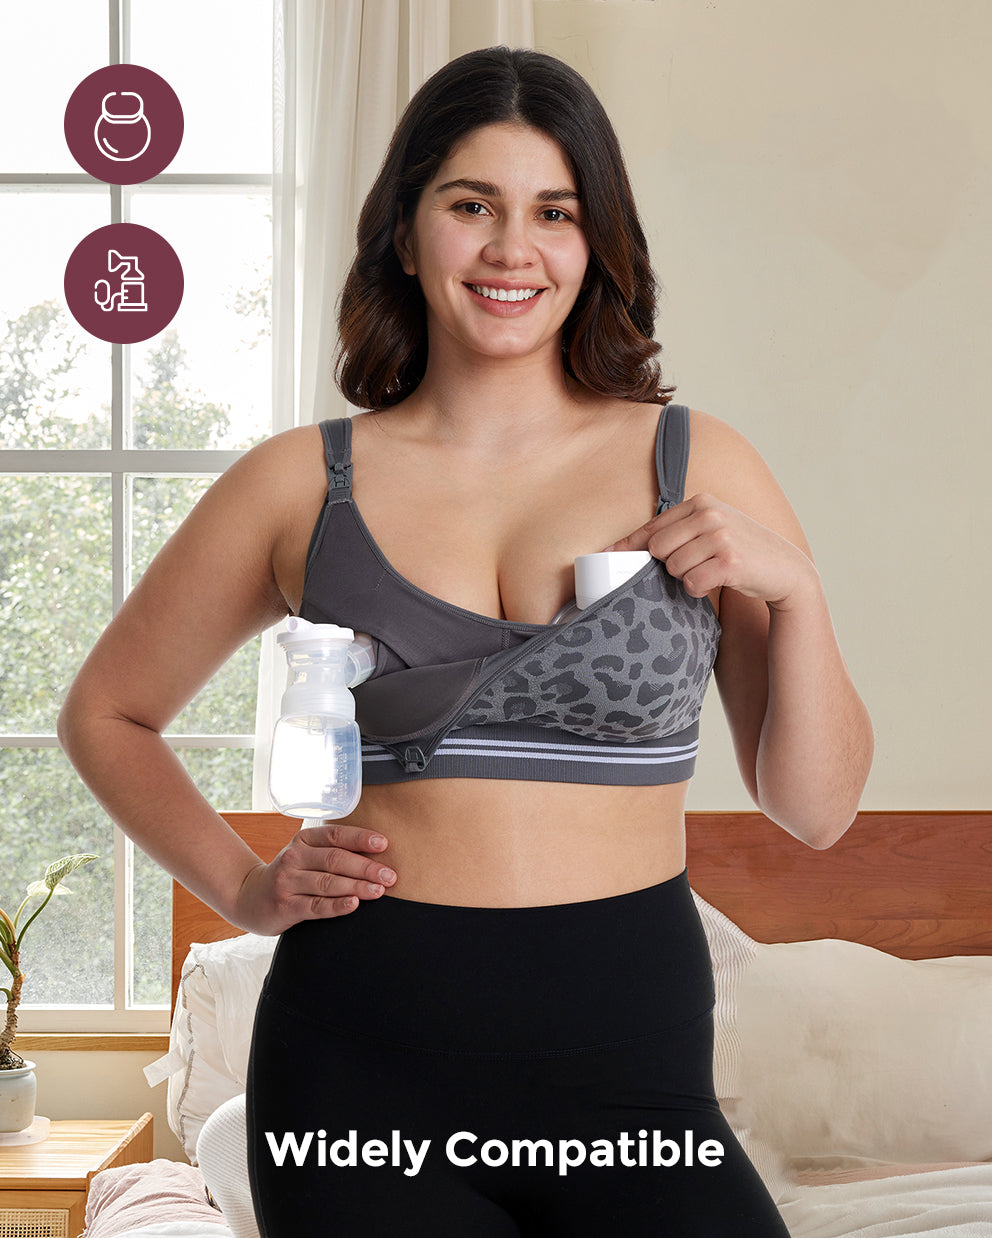  Momcozy 4-in-1 Pumping Bra Hands Free, Fixed Padding